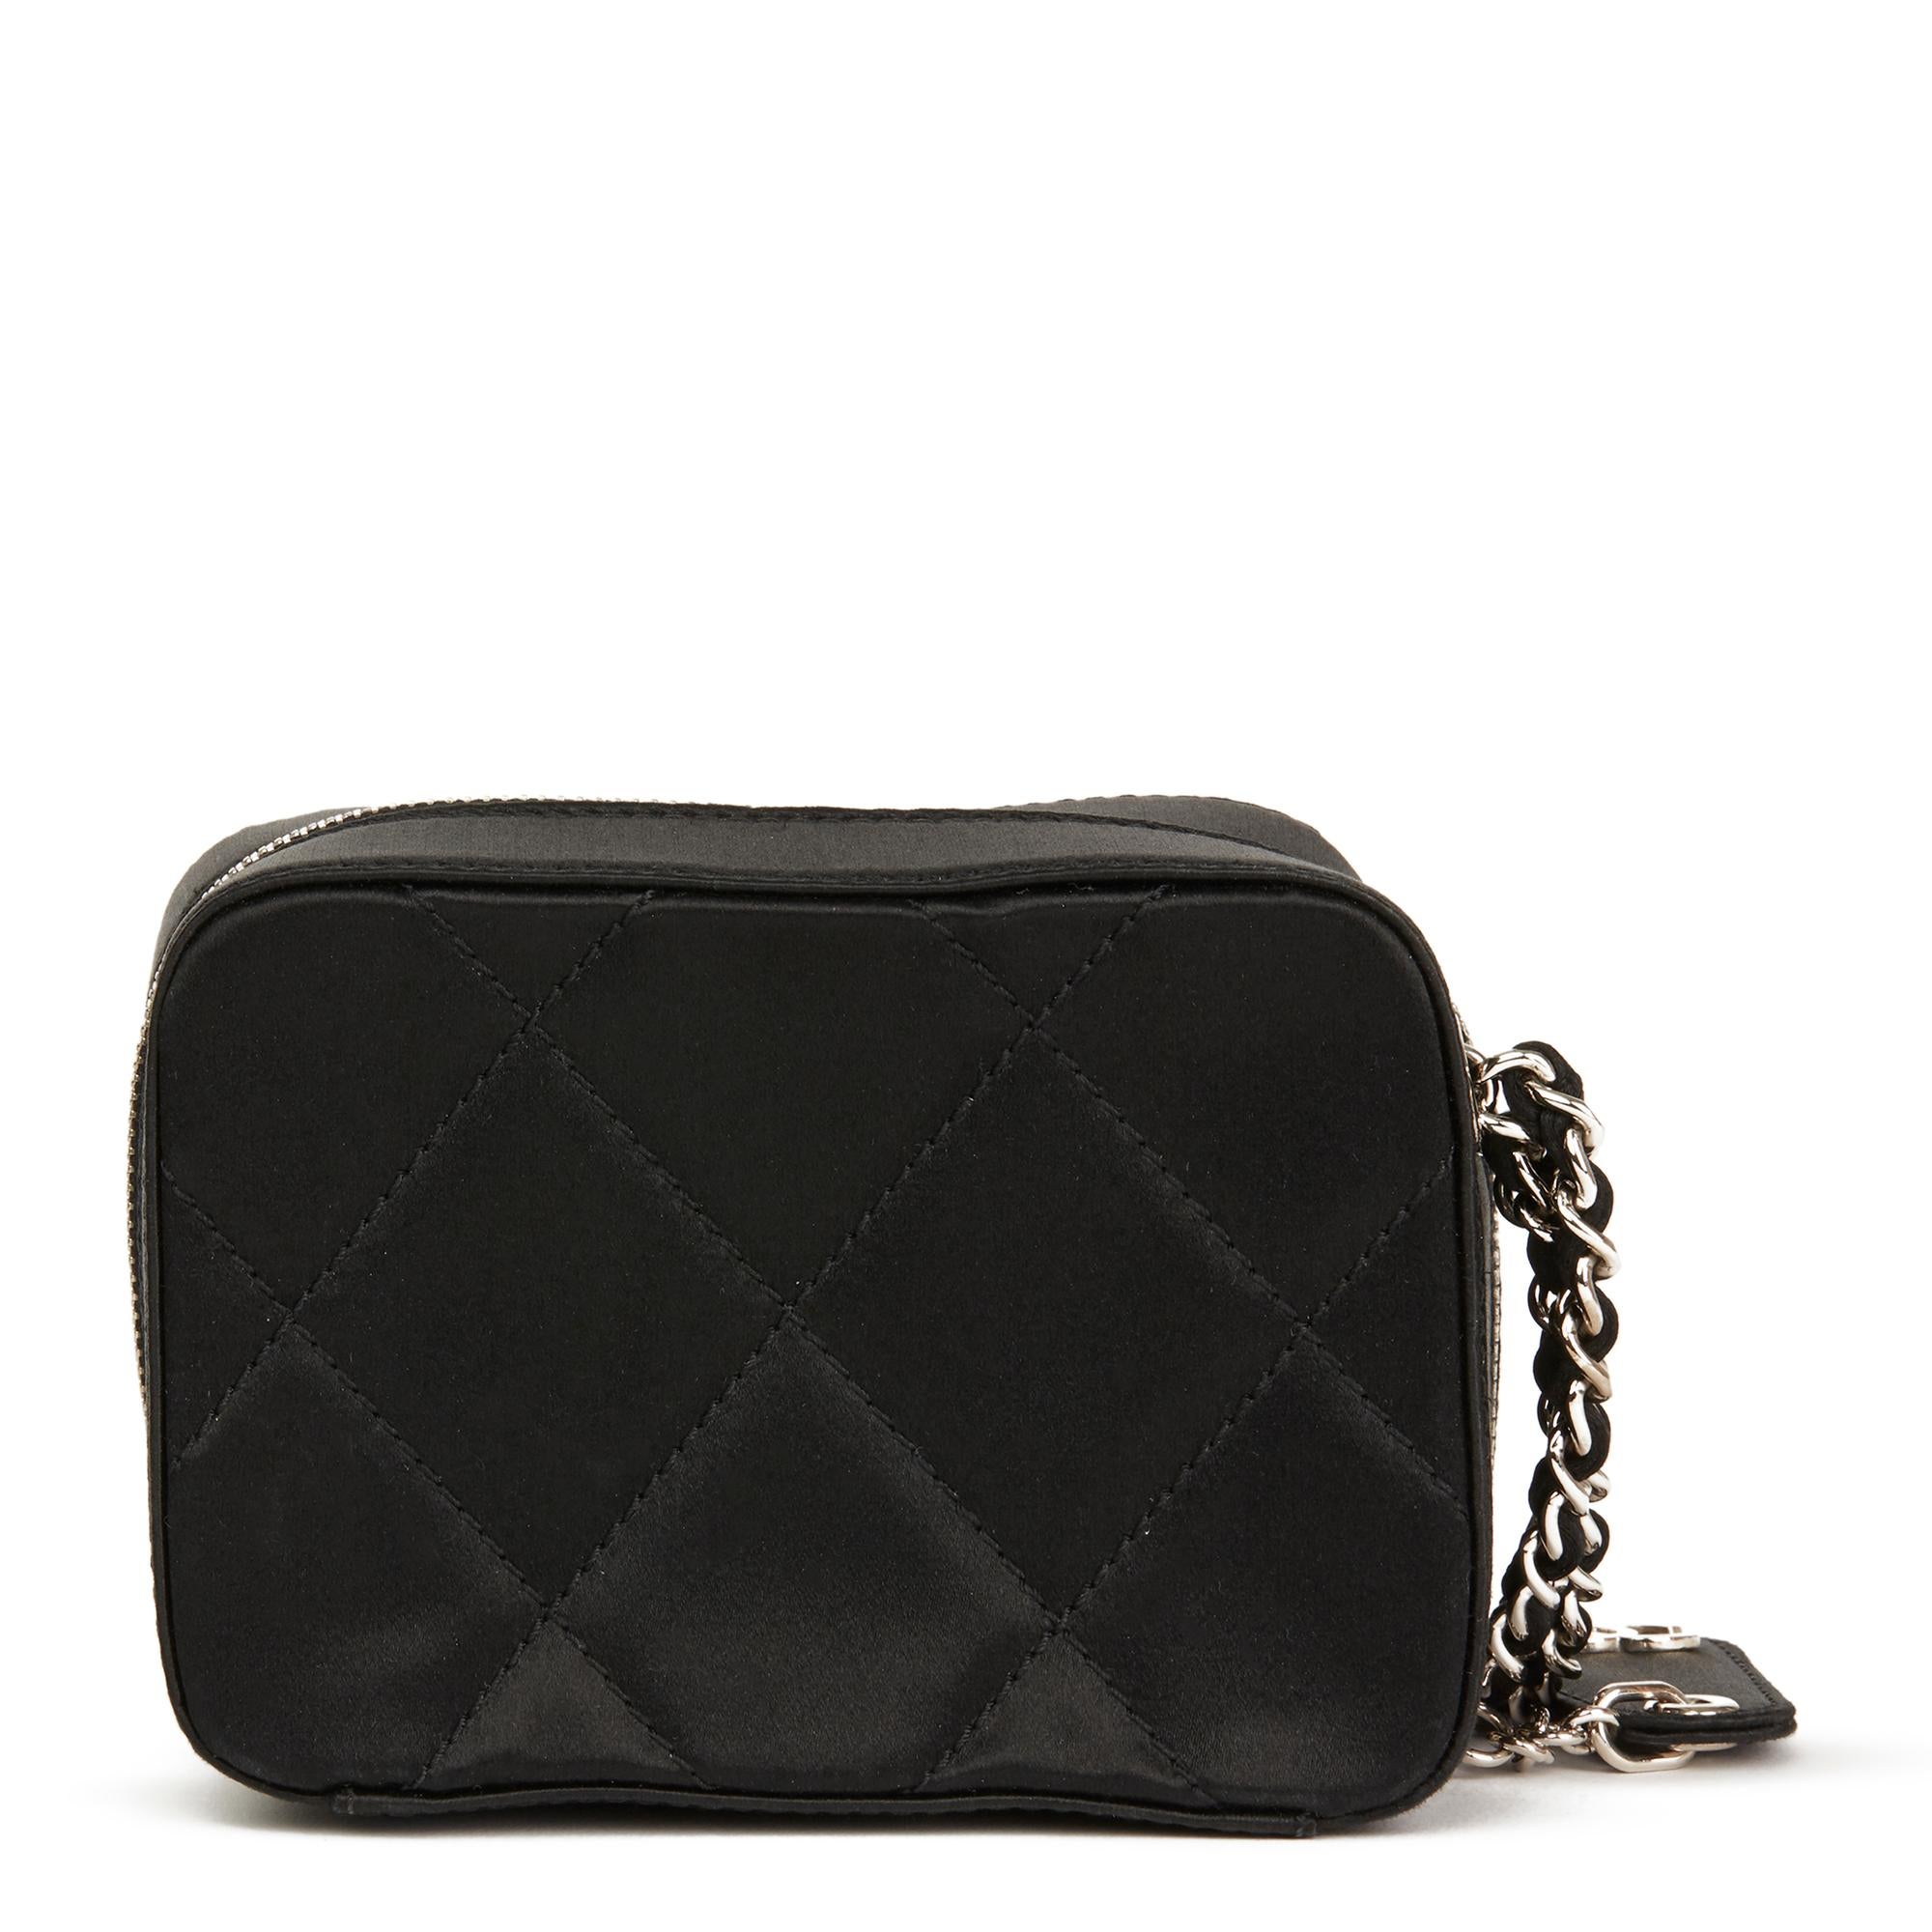 Women's 2001 Chanel Black Quilted Satin Mini Timeless Wristlet